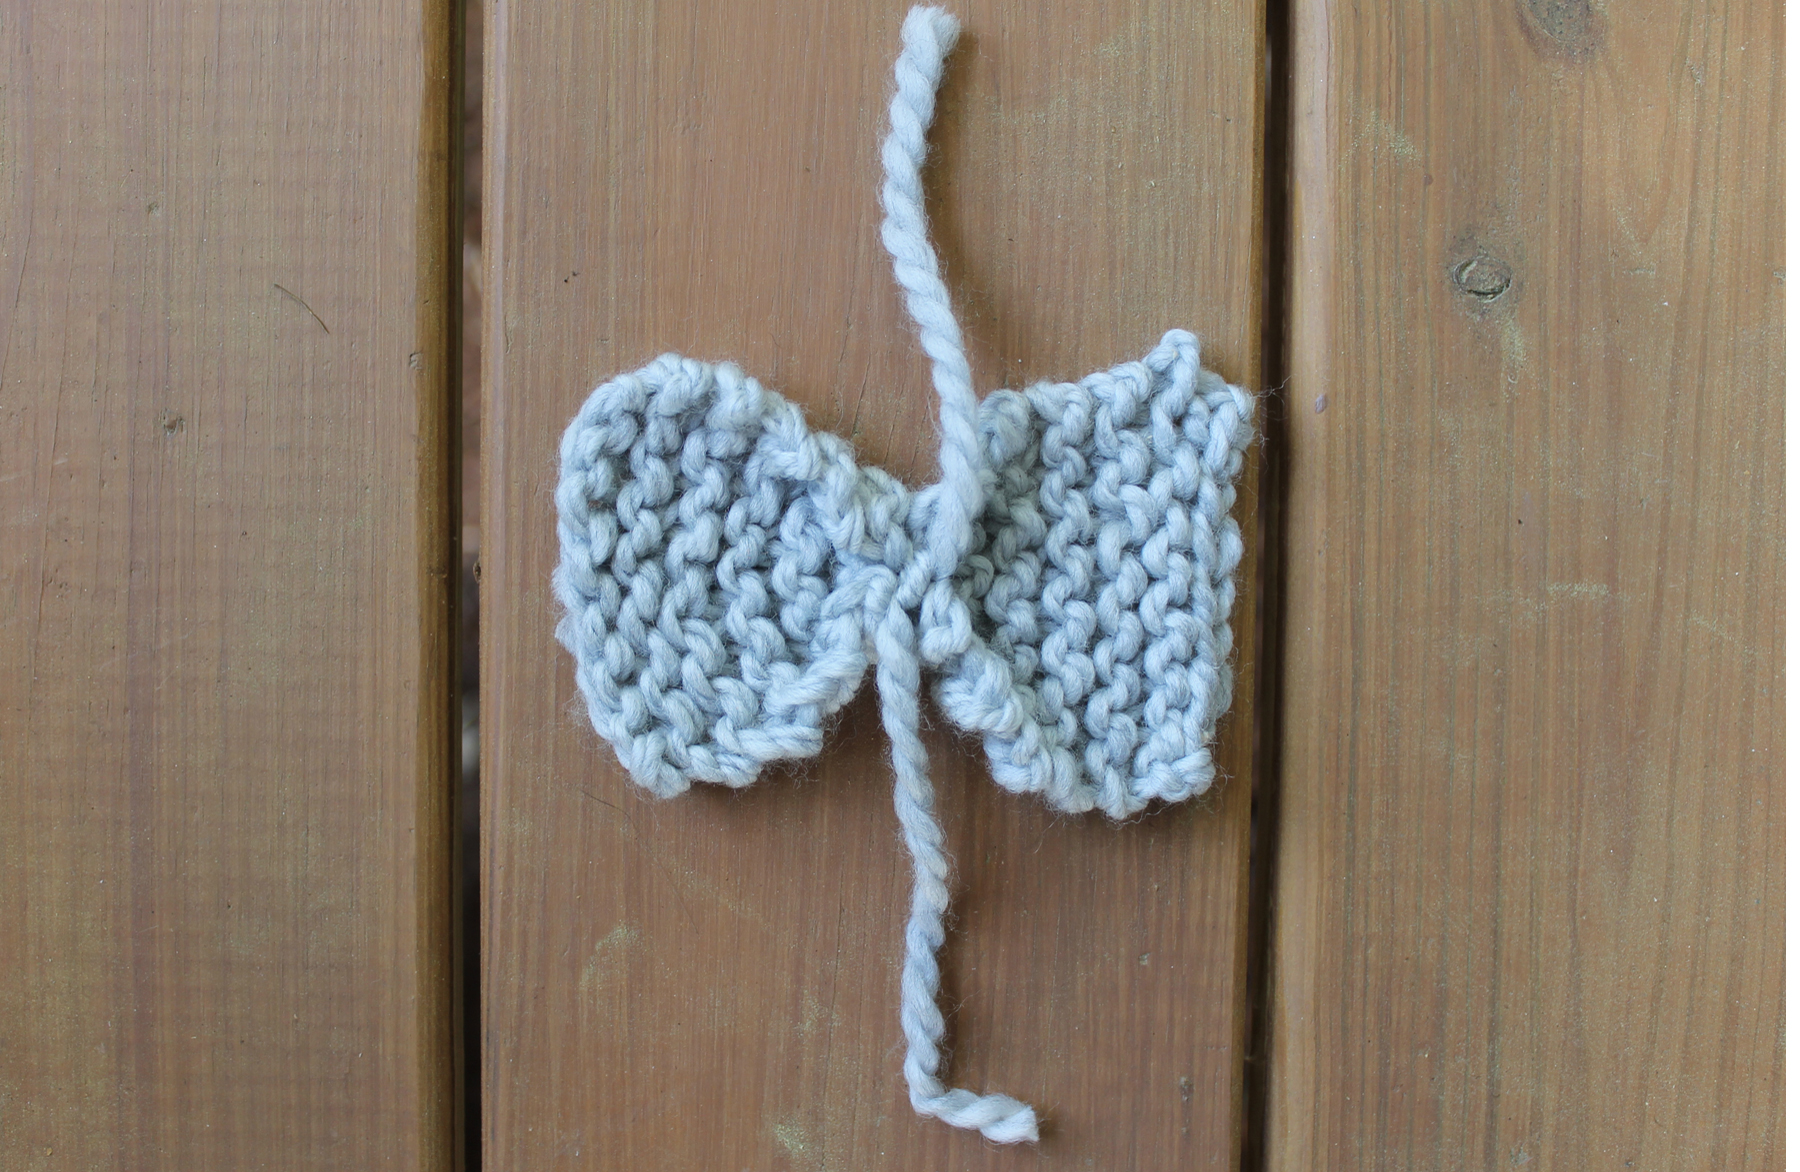 Tying a knit bow